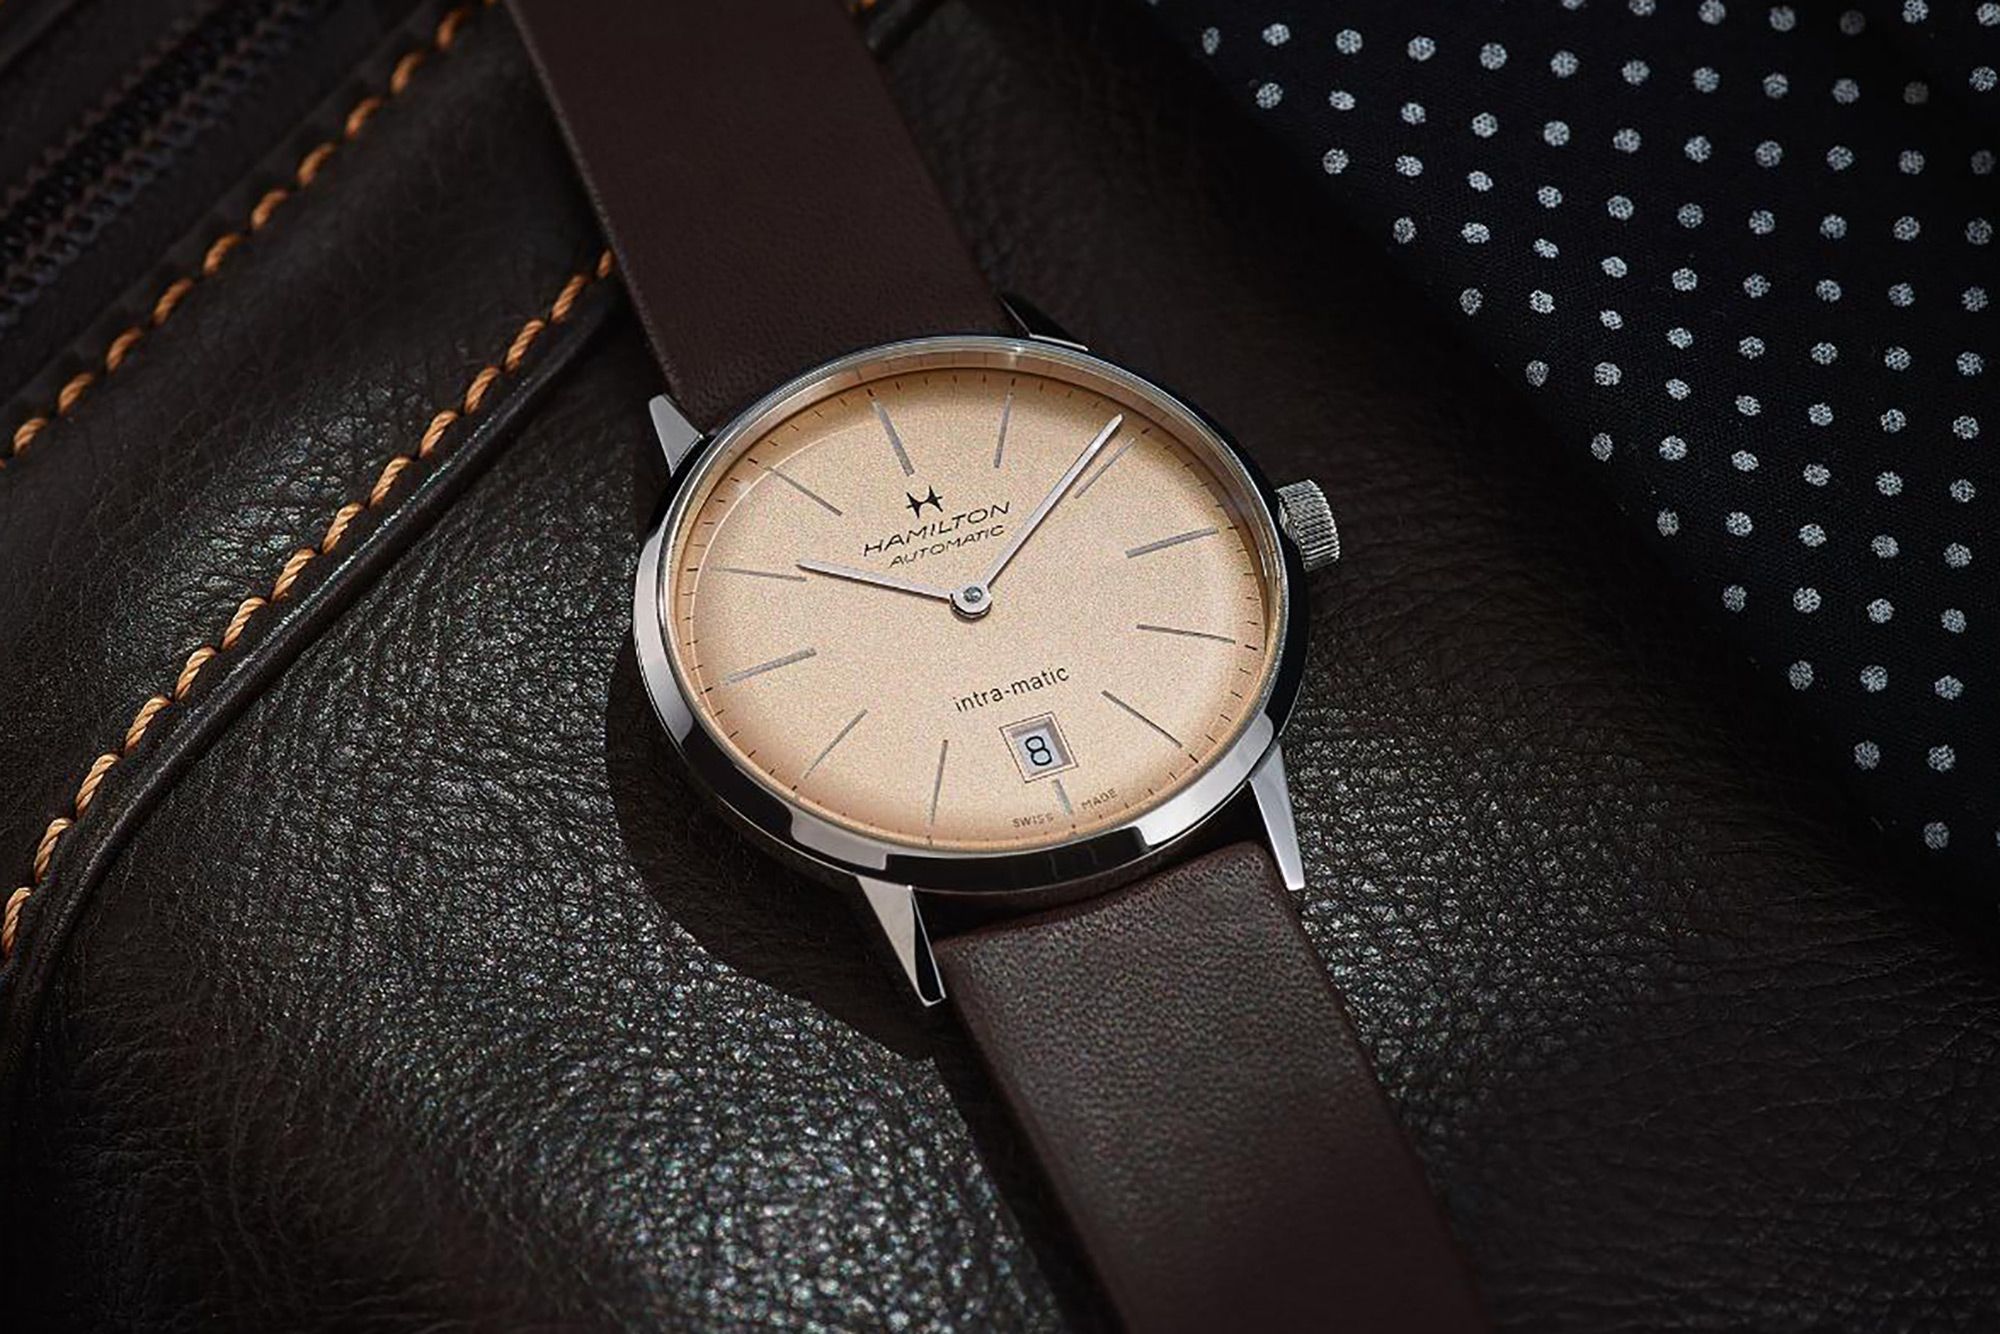 Sale > thin automatic dress watch > in stock